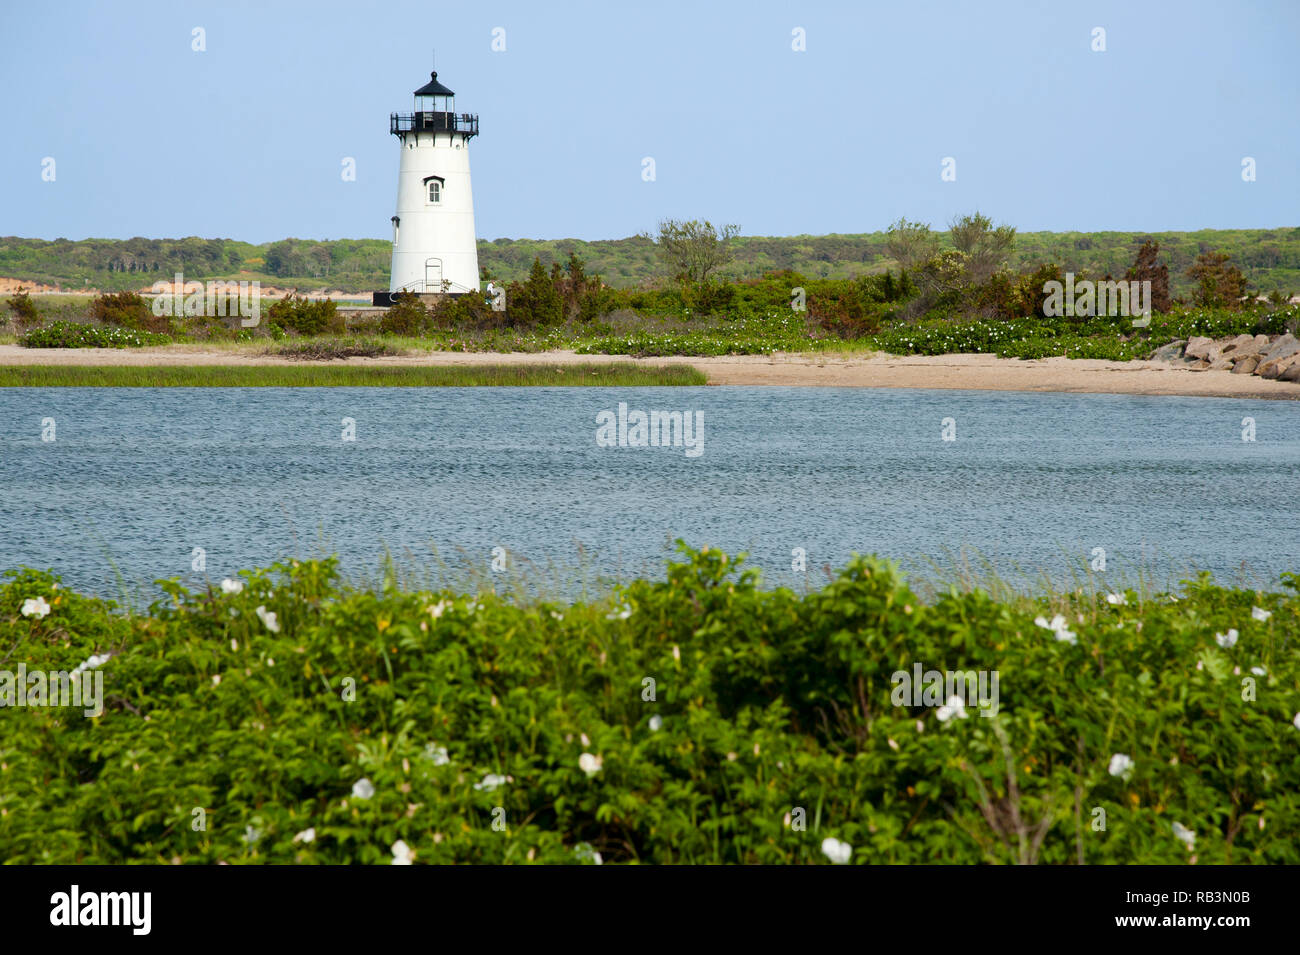 Edgartown lighthouse is a favorite destination for tourists on Martha’s Vineyard island during the summer months. Beach roses in the foreground surrou Stock Photo